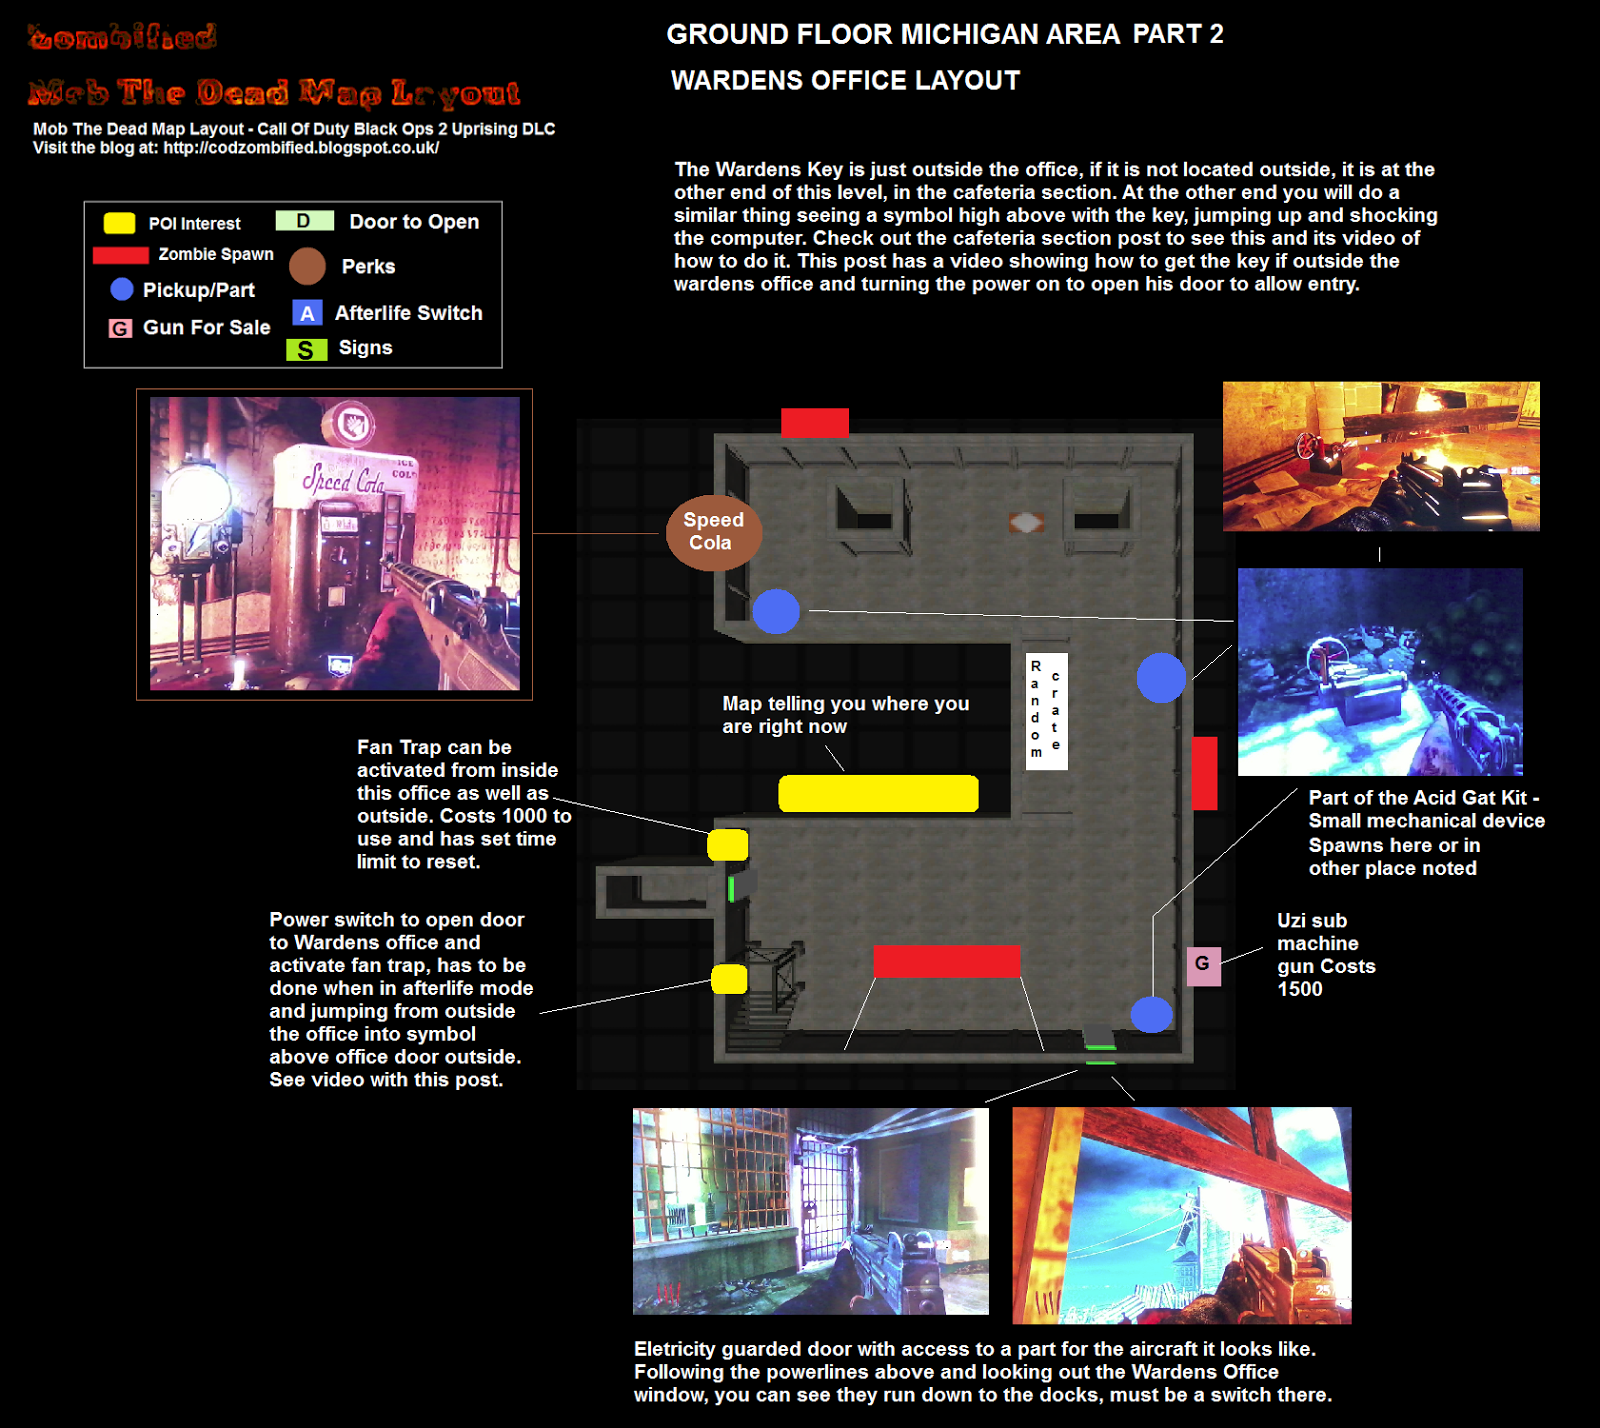 Zombified Call Of Duty Zombie Map Layouts Secrets Easter Eggs And Walkthrough Guides Mob Of The Dead Map Layout Michigan Area Floor Layout Black Ops 2 Uprising Dlc